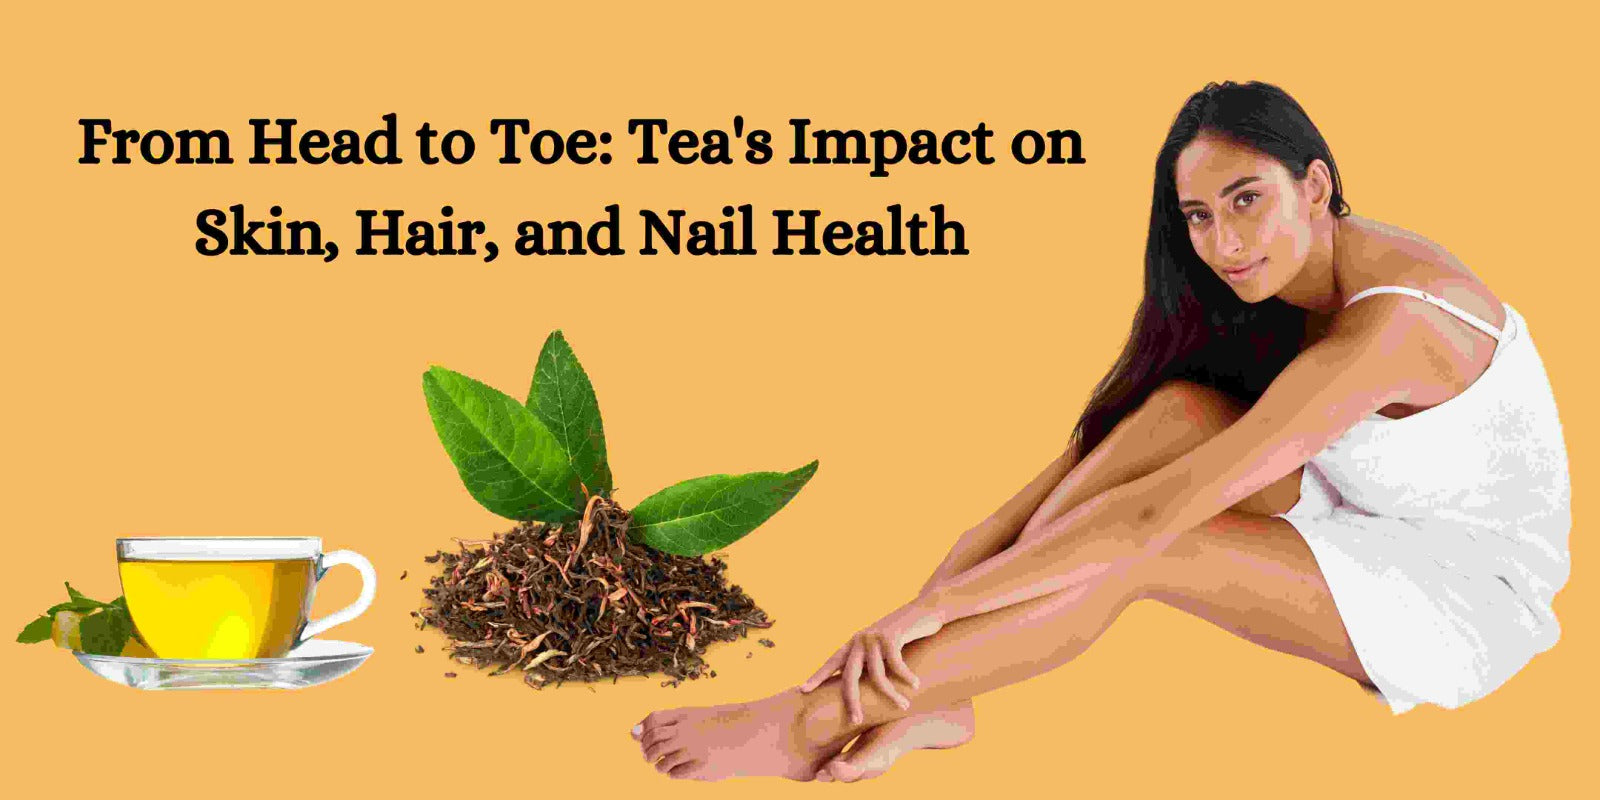 From Head to Toe: Tea's Impact on Skin, Hair, and Nail Health